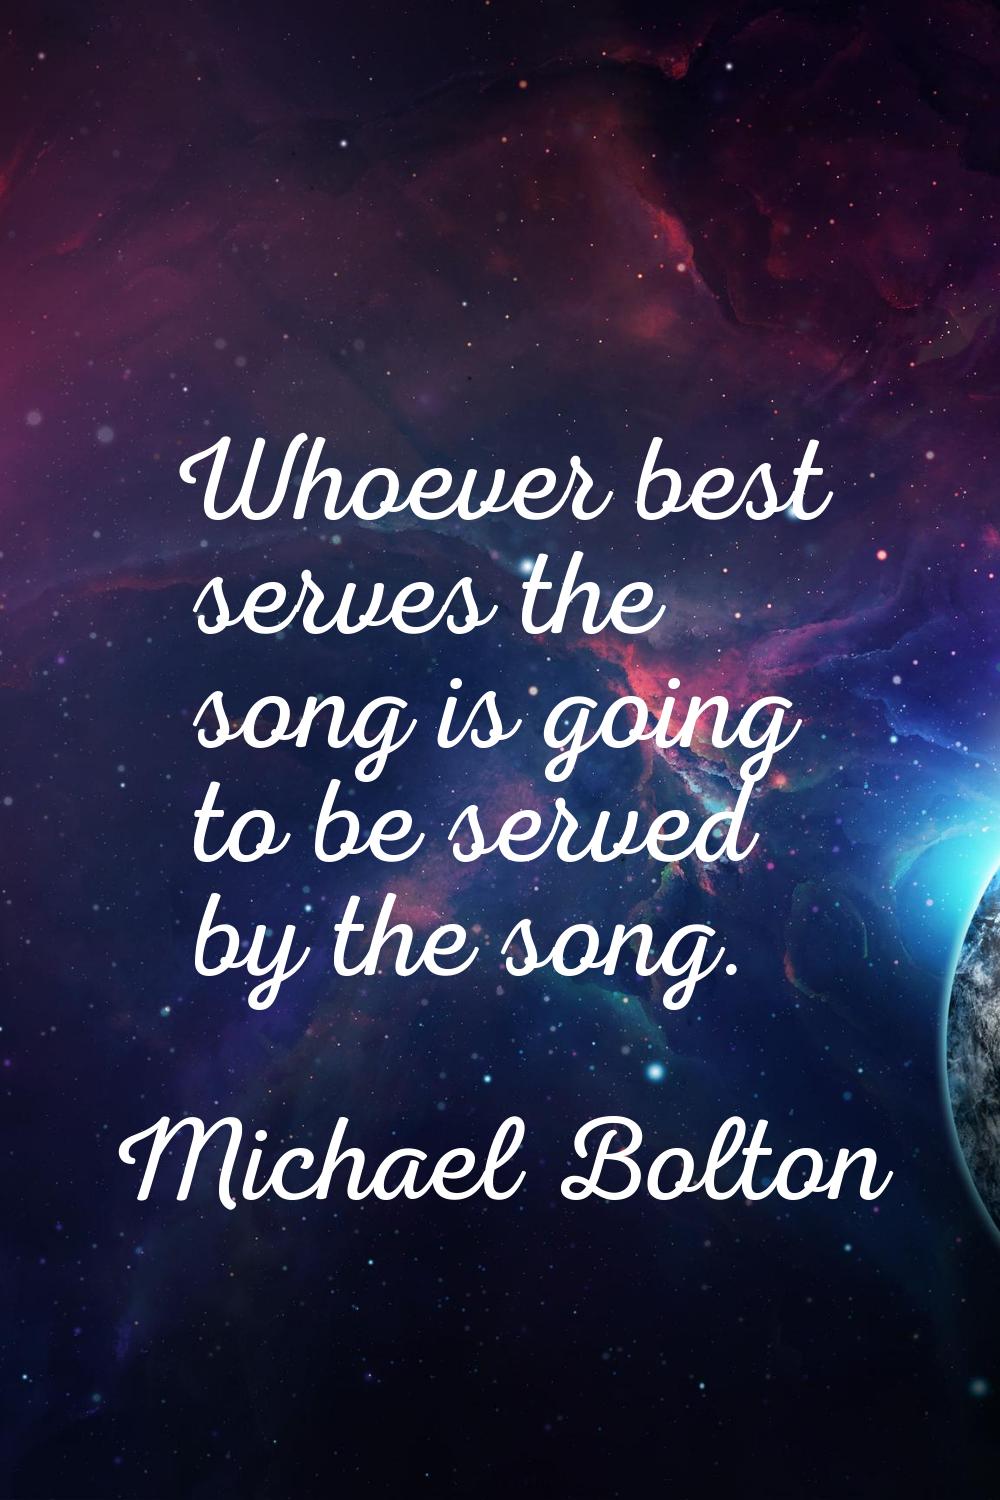 Whoever best serves the song is going to be served by the song.